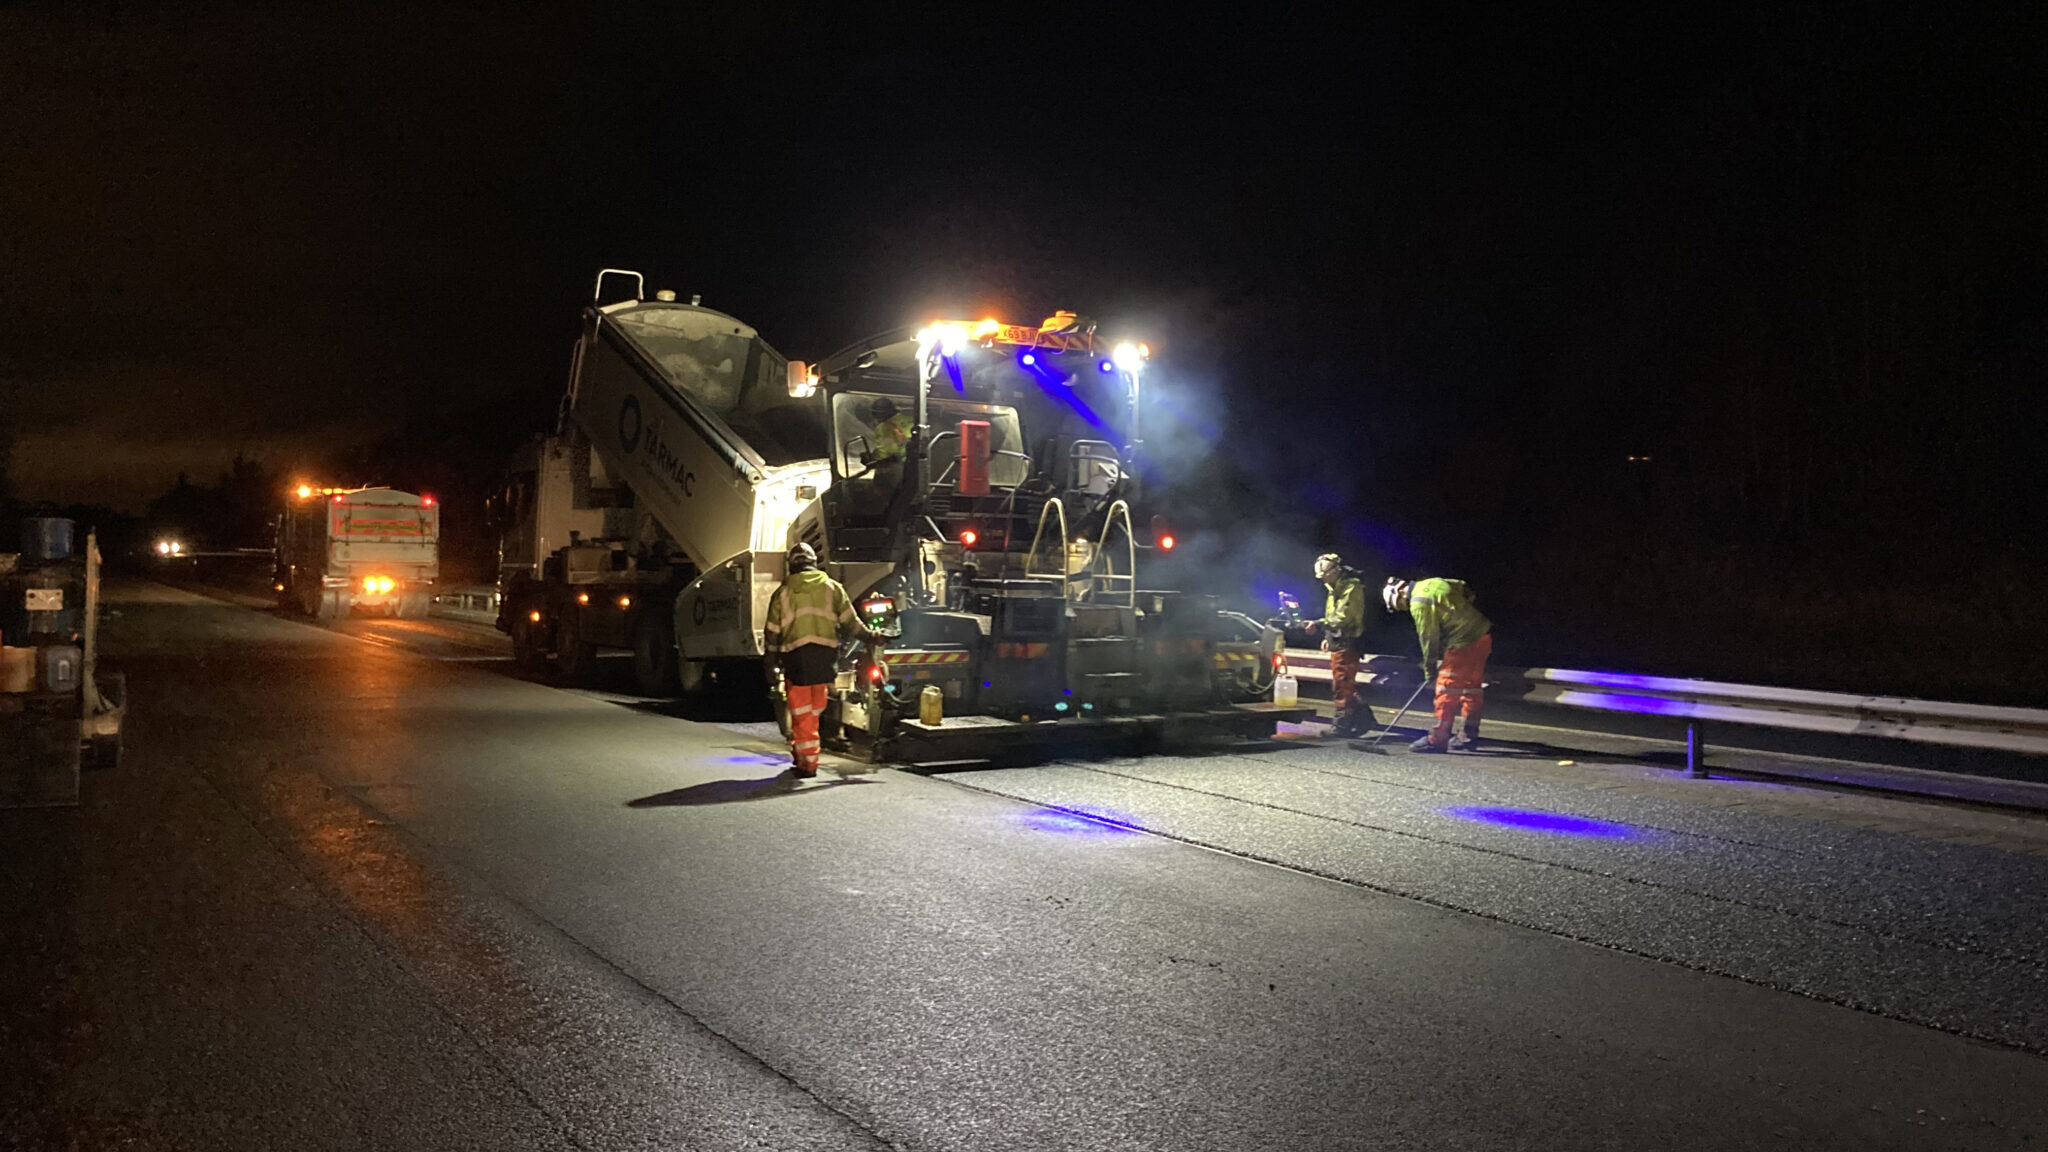 OVERNIGHT RESURFACING WORKS ON THE M8 EASTBOUND